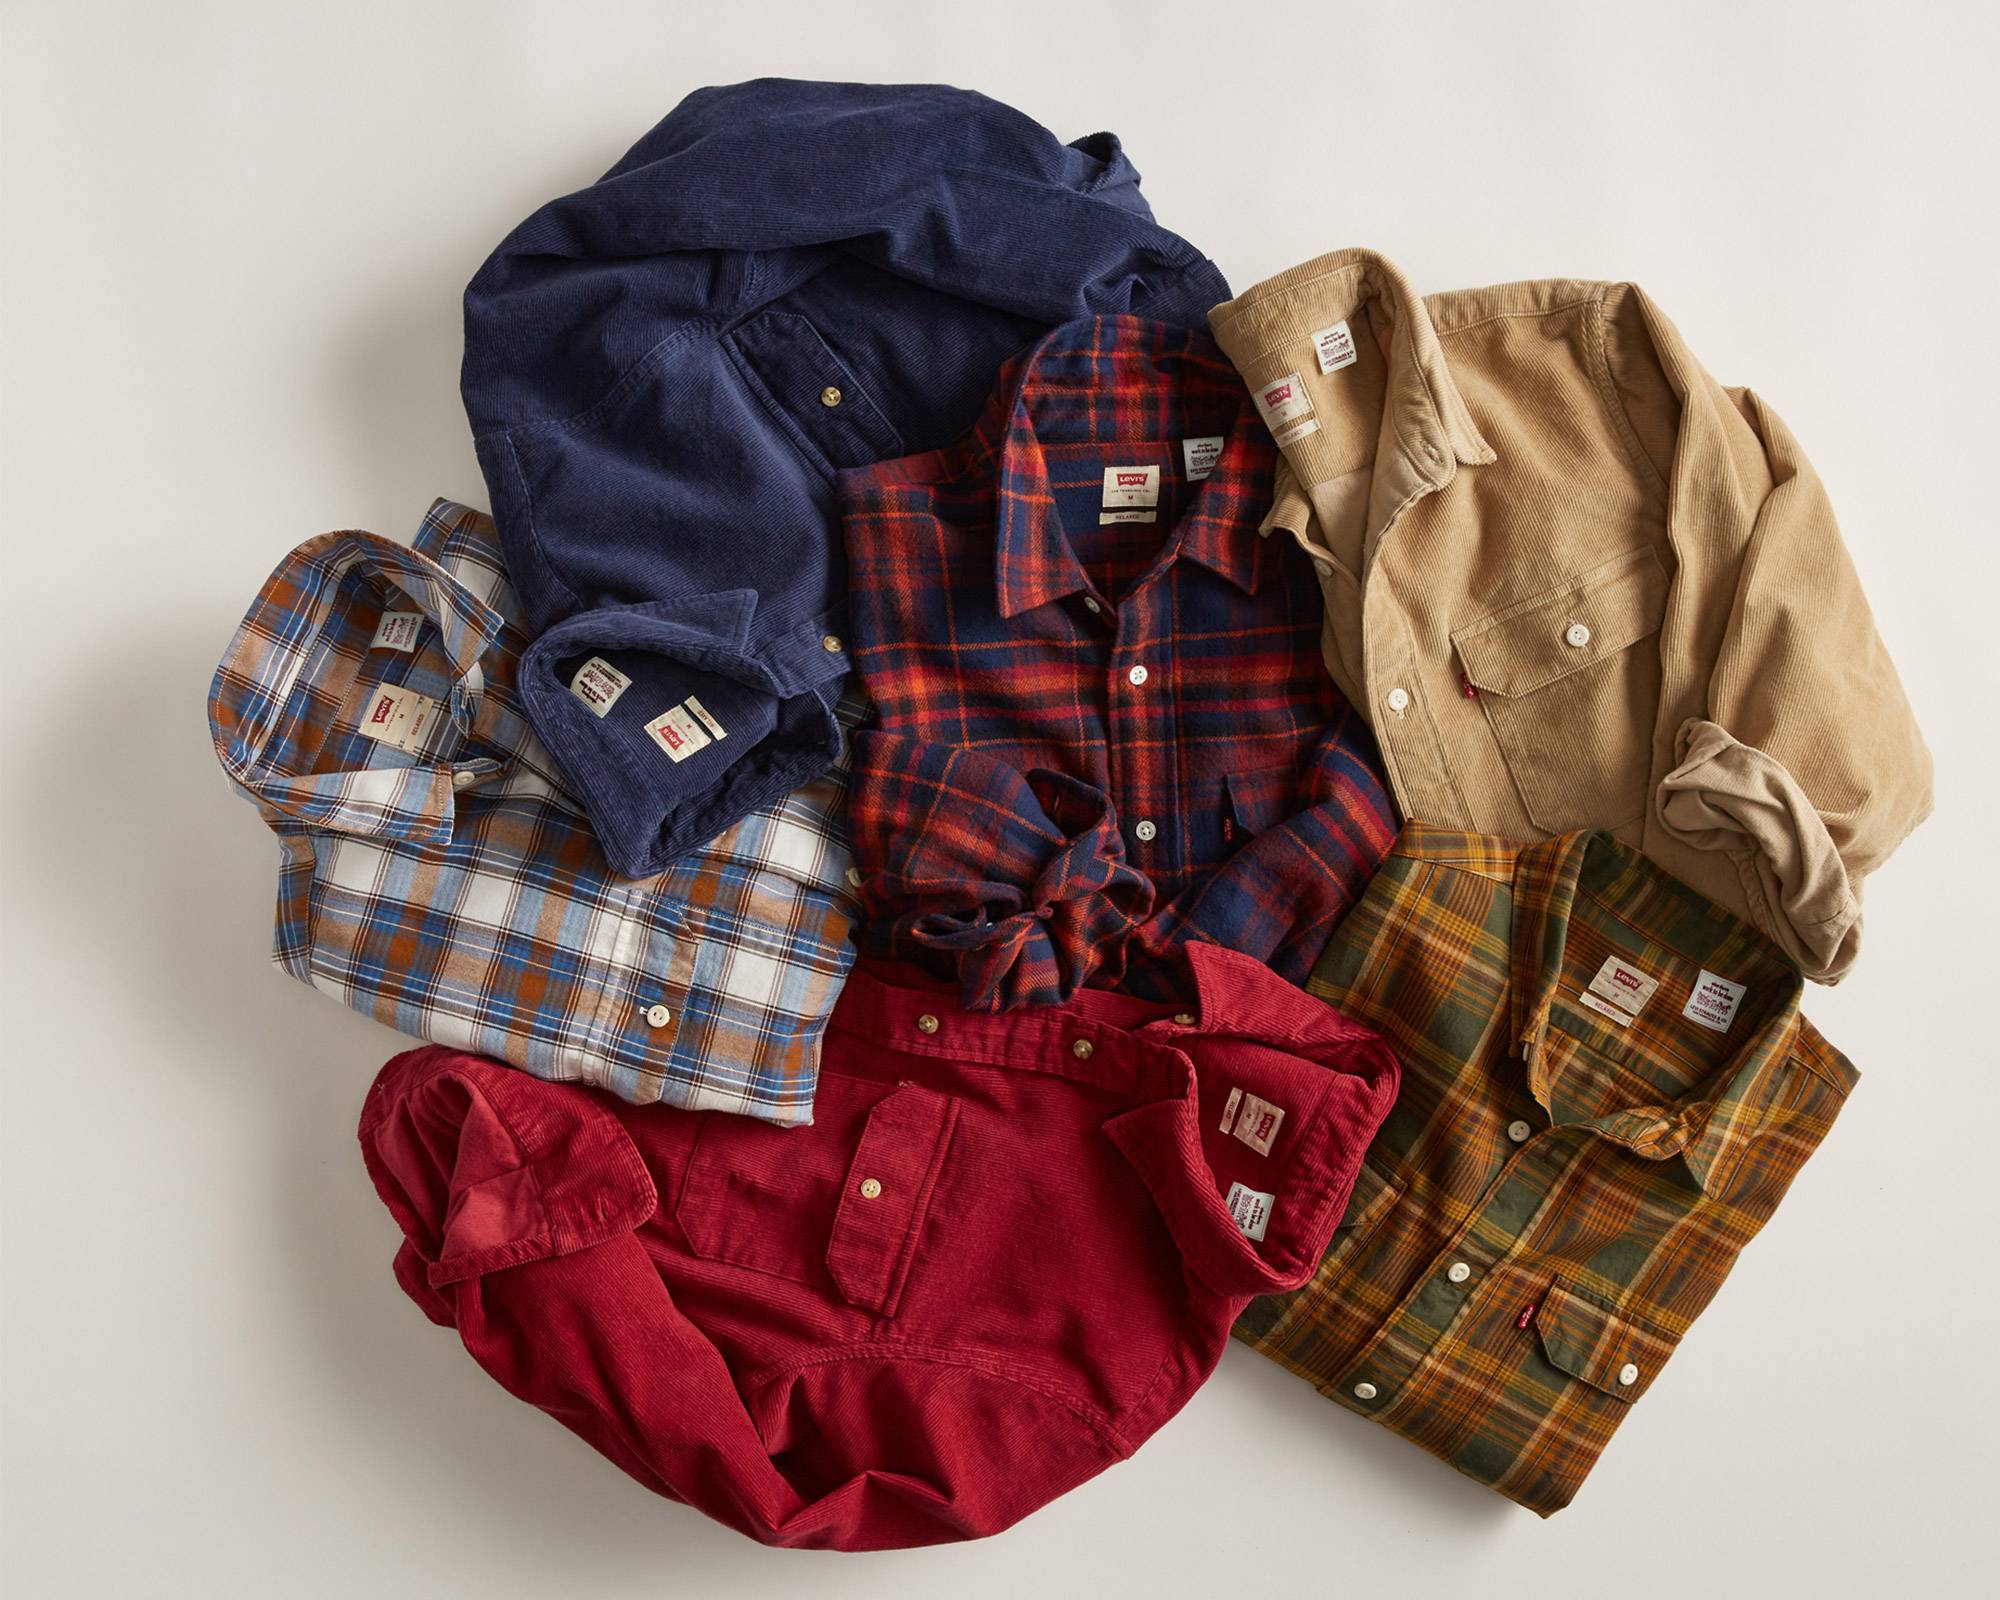 Six different button-up shirts that are laid down next to each other, all in different seasonal colors.